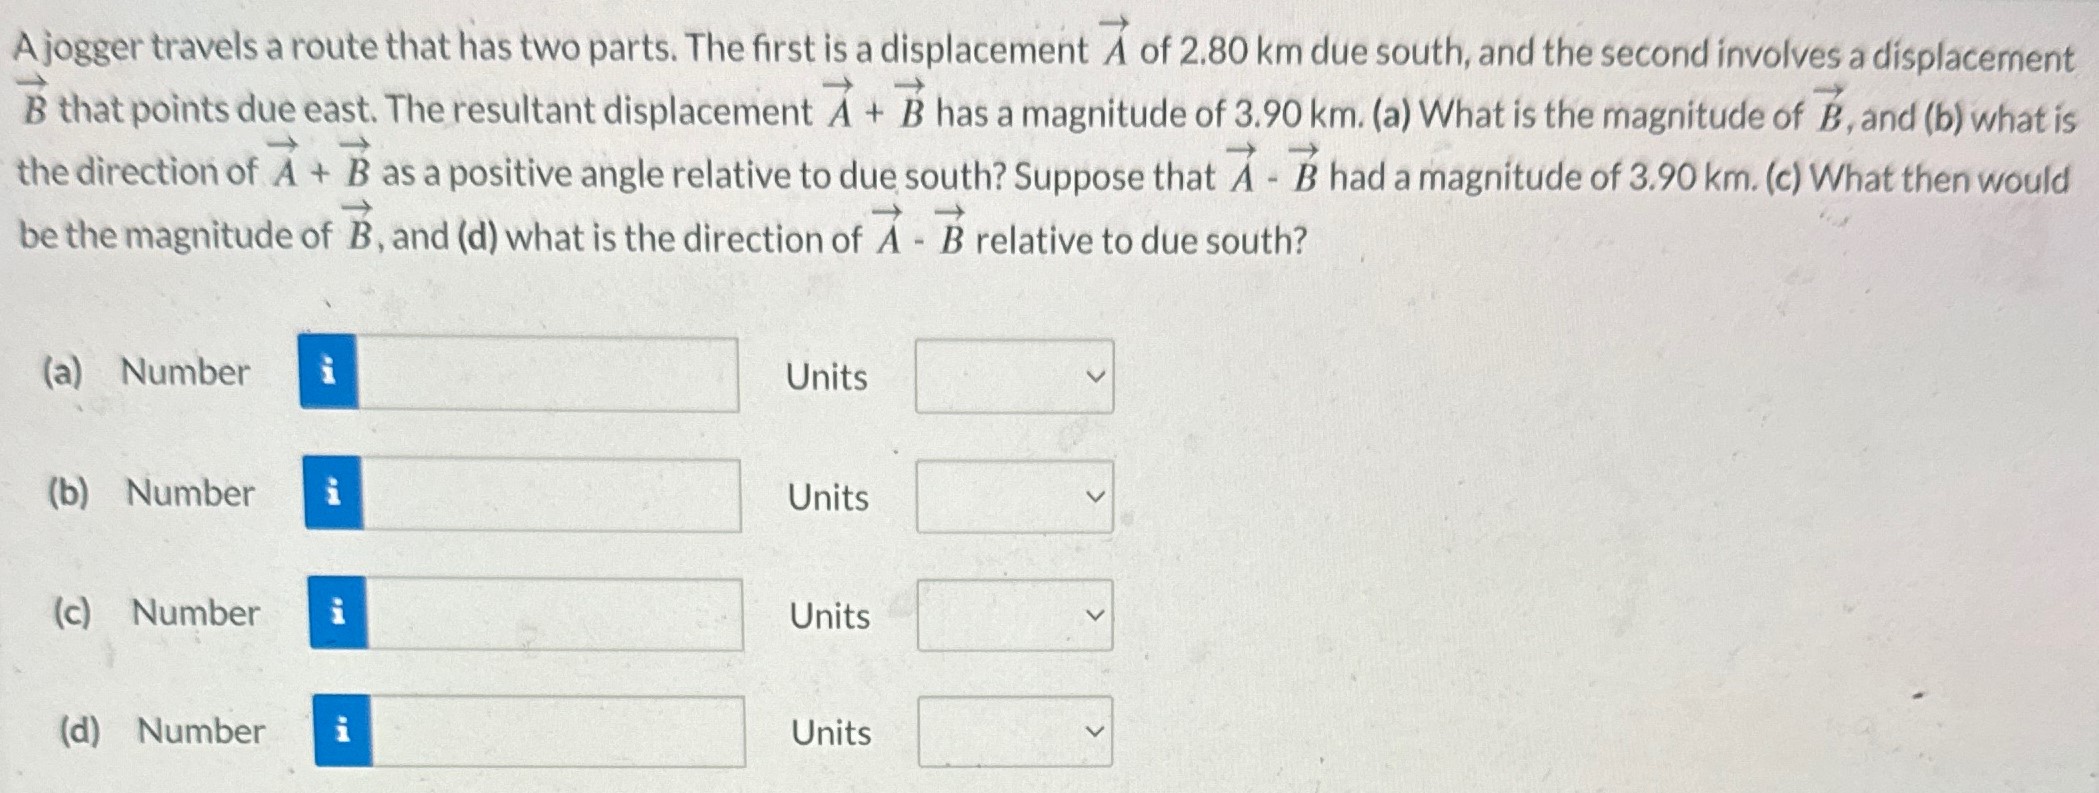 A jogger travels a route that has two parts. The first is a displacement A→ of 2.80 km due south, and the second involves a displacement B→ that points due east. The resultant displacement A→ + B→ has a magnitude of 3.90 km. (a) What is the magnitude of B→, and (b) what is the direction of A→+B→ as a positive angle relative to due south? Suppose that A→ − B→ had a magnitude of 3.90 km. (c) What then would be the magnitude of B→, and (d) what is the direction of A→⋅B→ relative to due south? (a) Number Units (b) Number Units (c) Number Units (d) Number Units